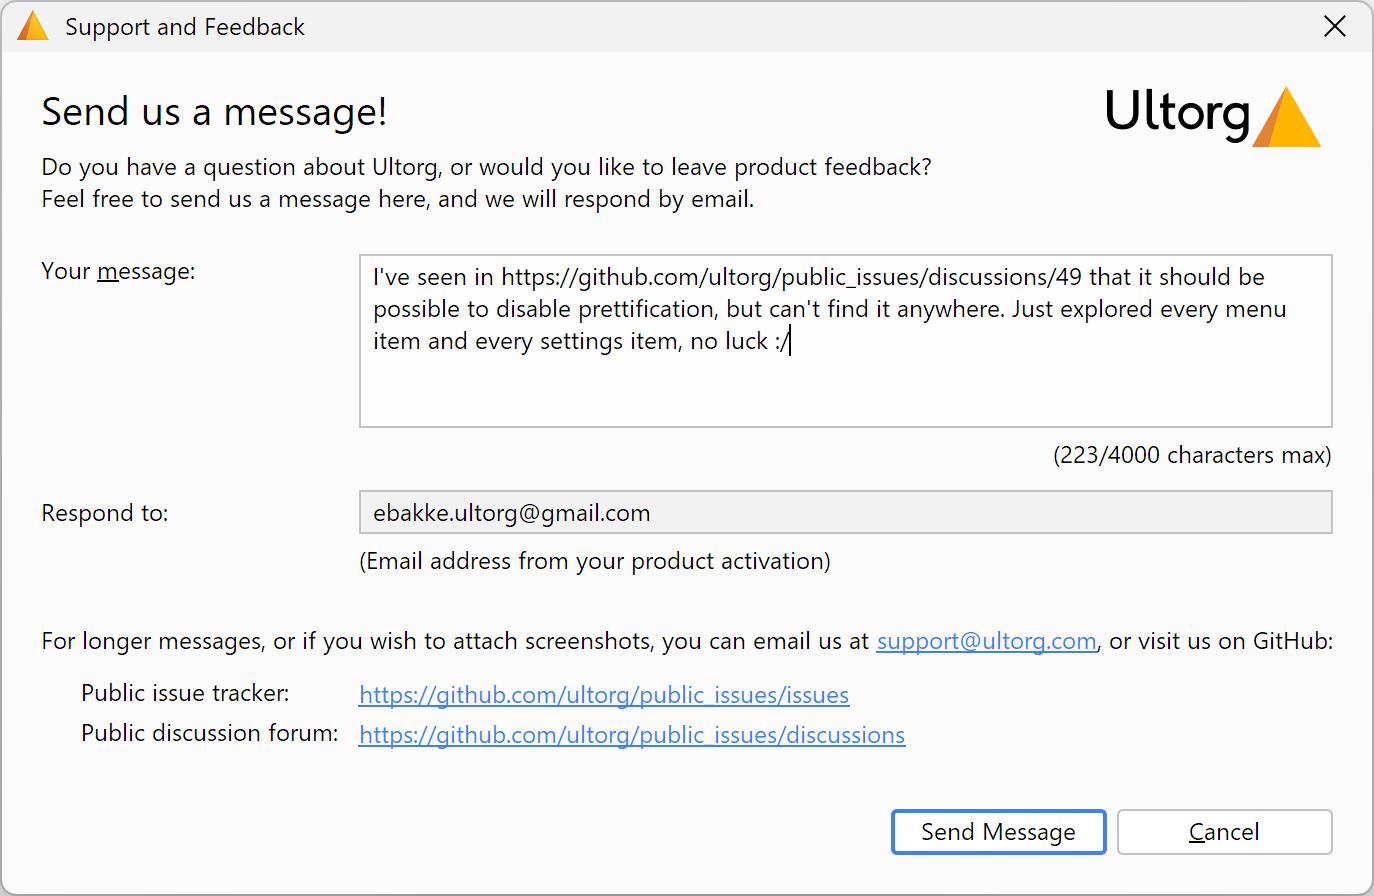 The Support and Feedback dialog.